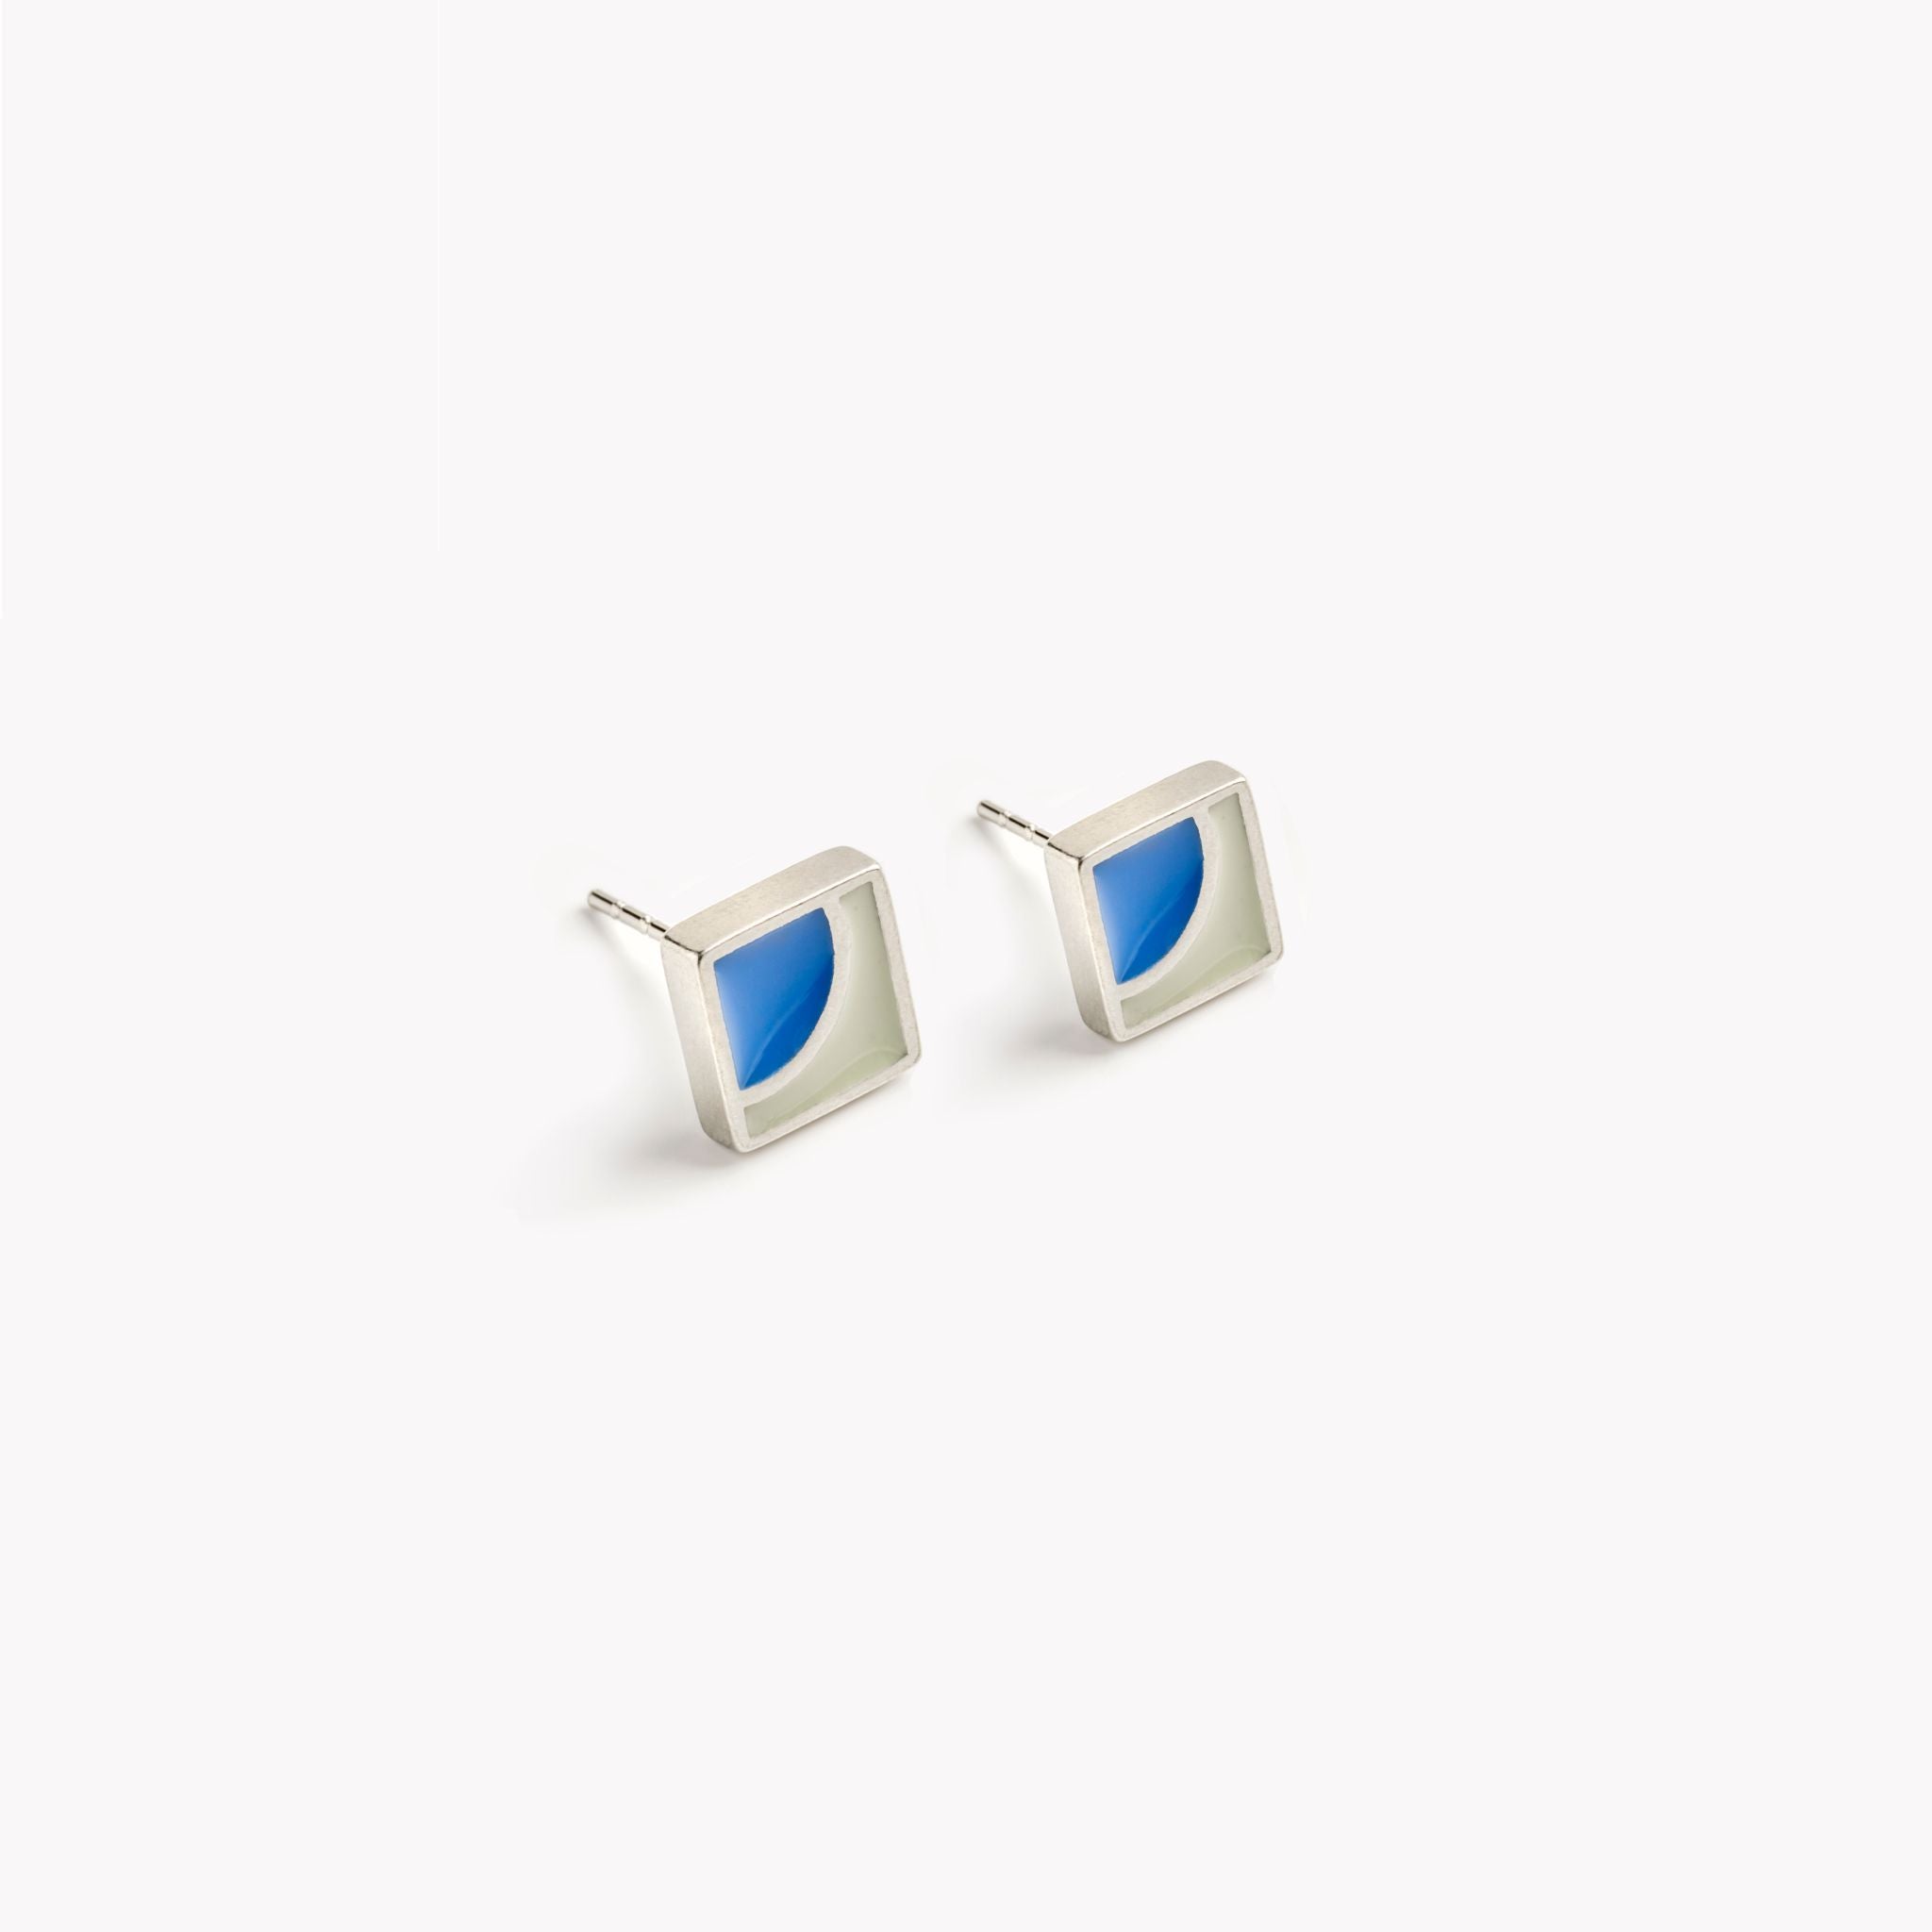 Blue and grey square stud earrings, pewter ear studs, colourful and  square, silver tone, simple minimal design. Warm grey and bright blue coastal tones, handmade in Wales using recycled tin.